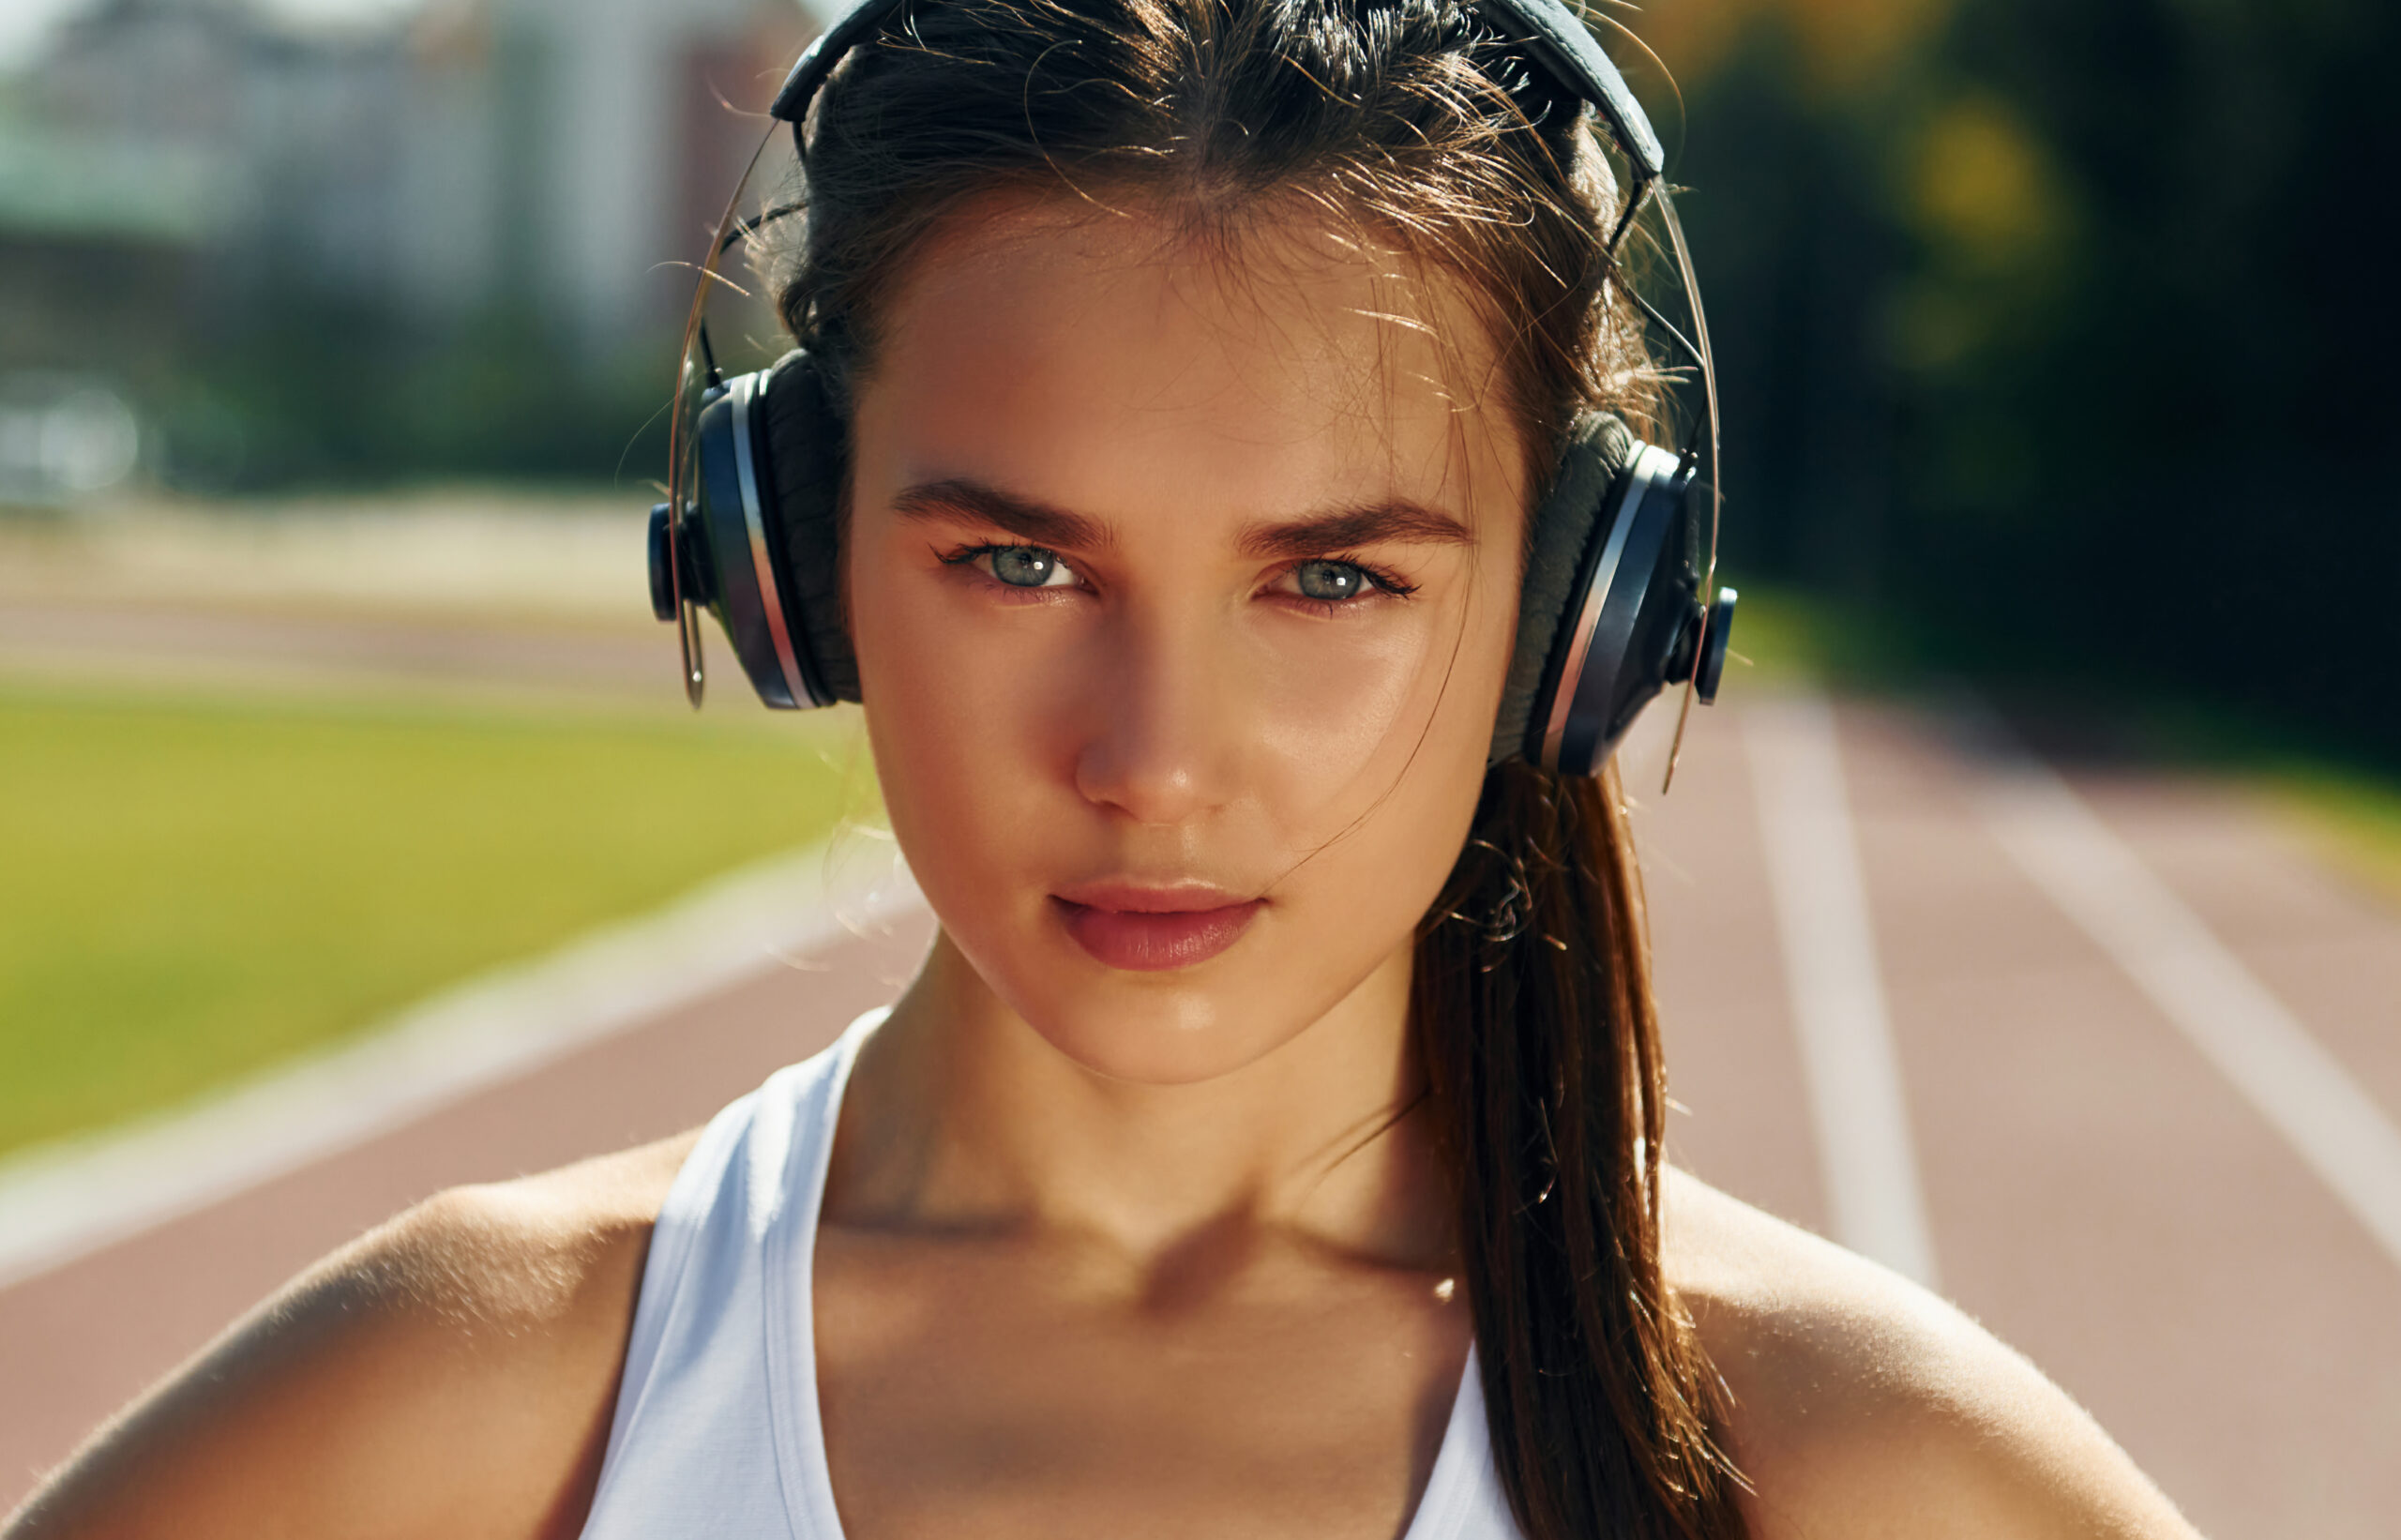 in-headphones-young-woman-in-sportive-clothes